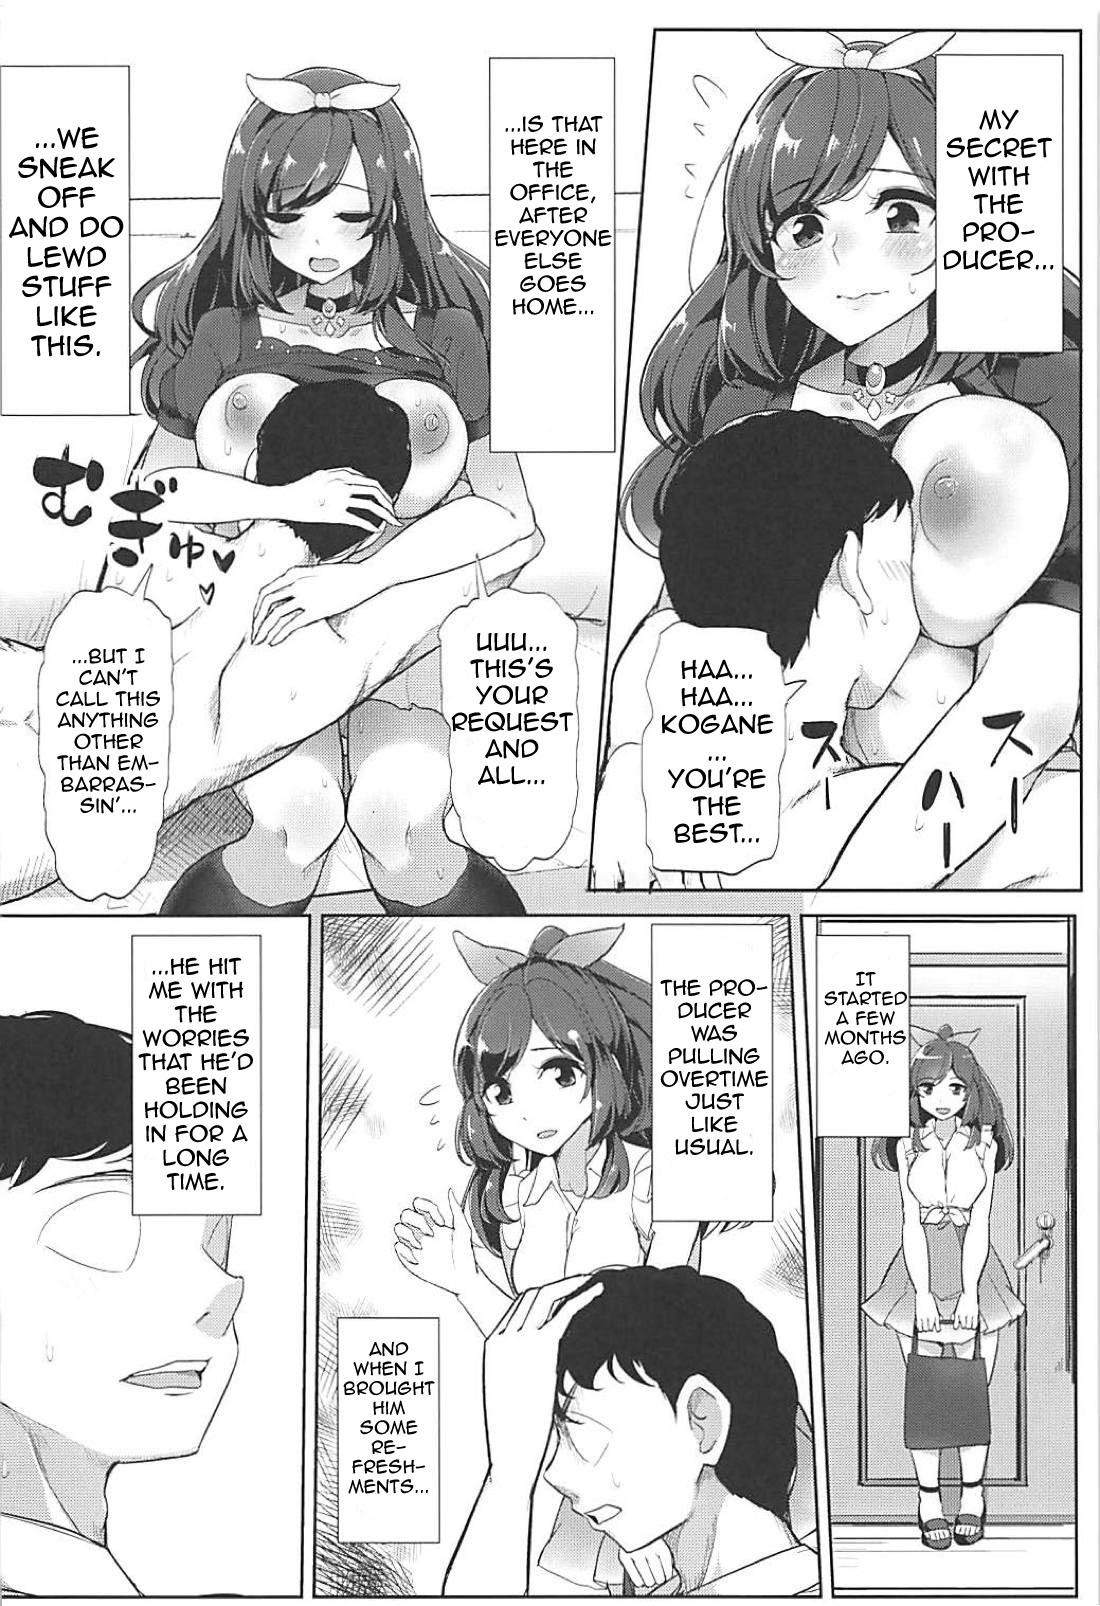 Tease P e no Suki wa Tomeraren bai - When I Just Can't Stop Loving The Producer - The idolmaster Hooker - Page 5